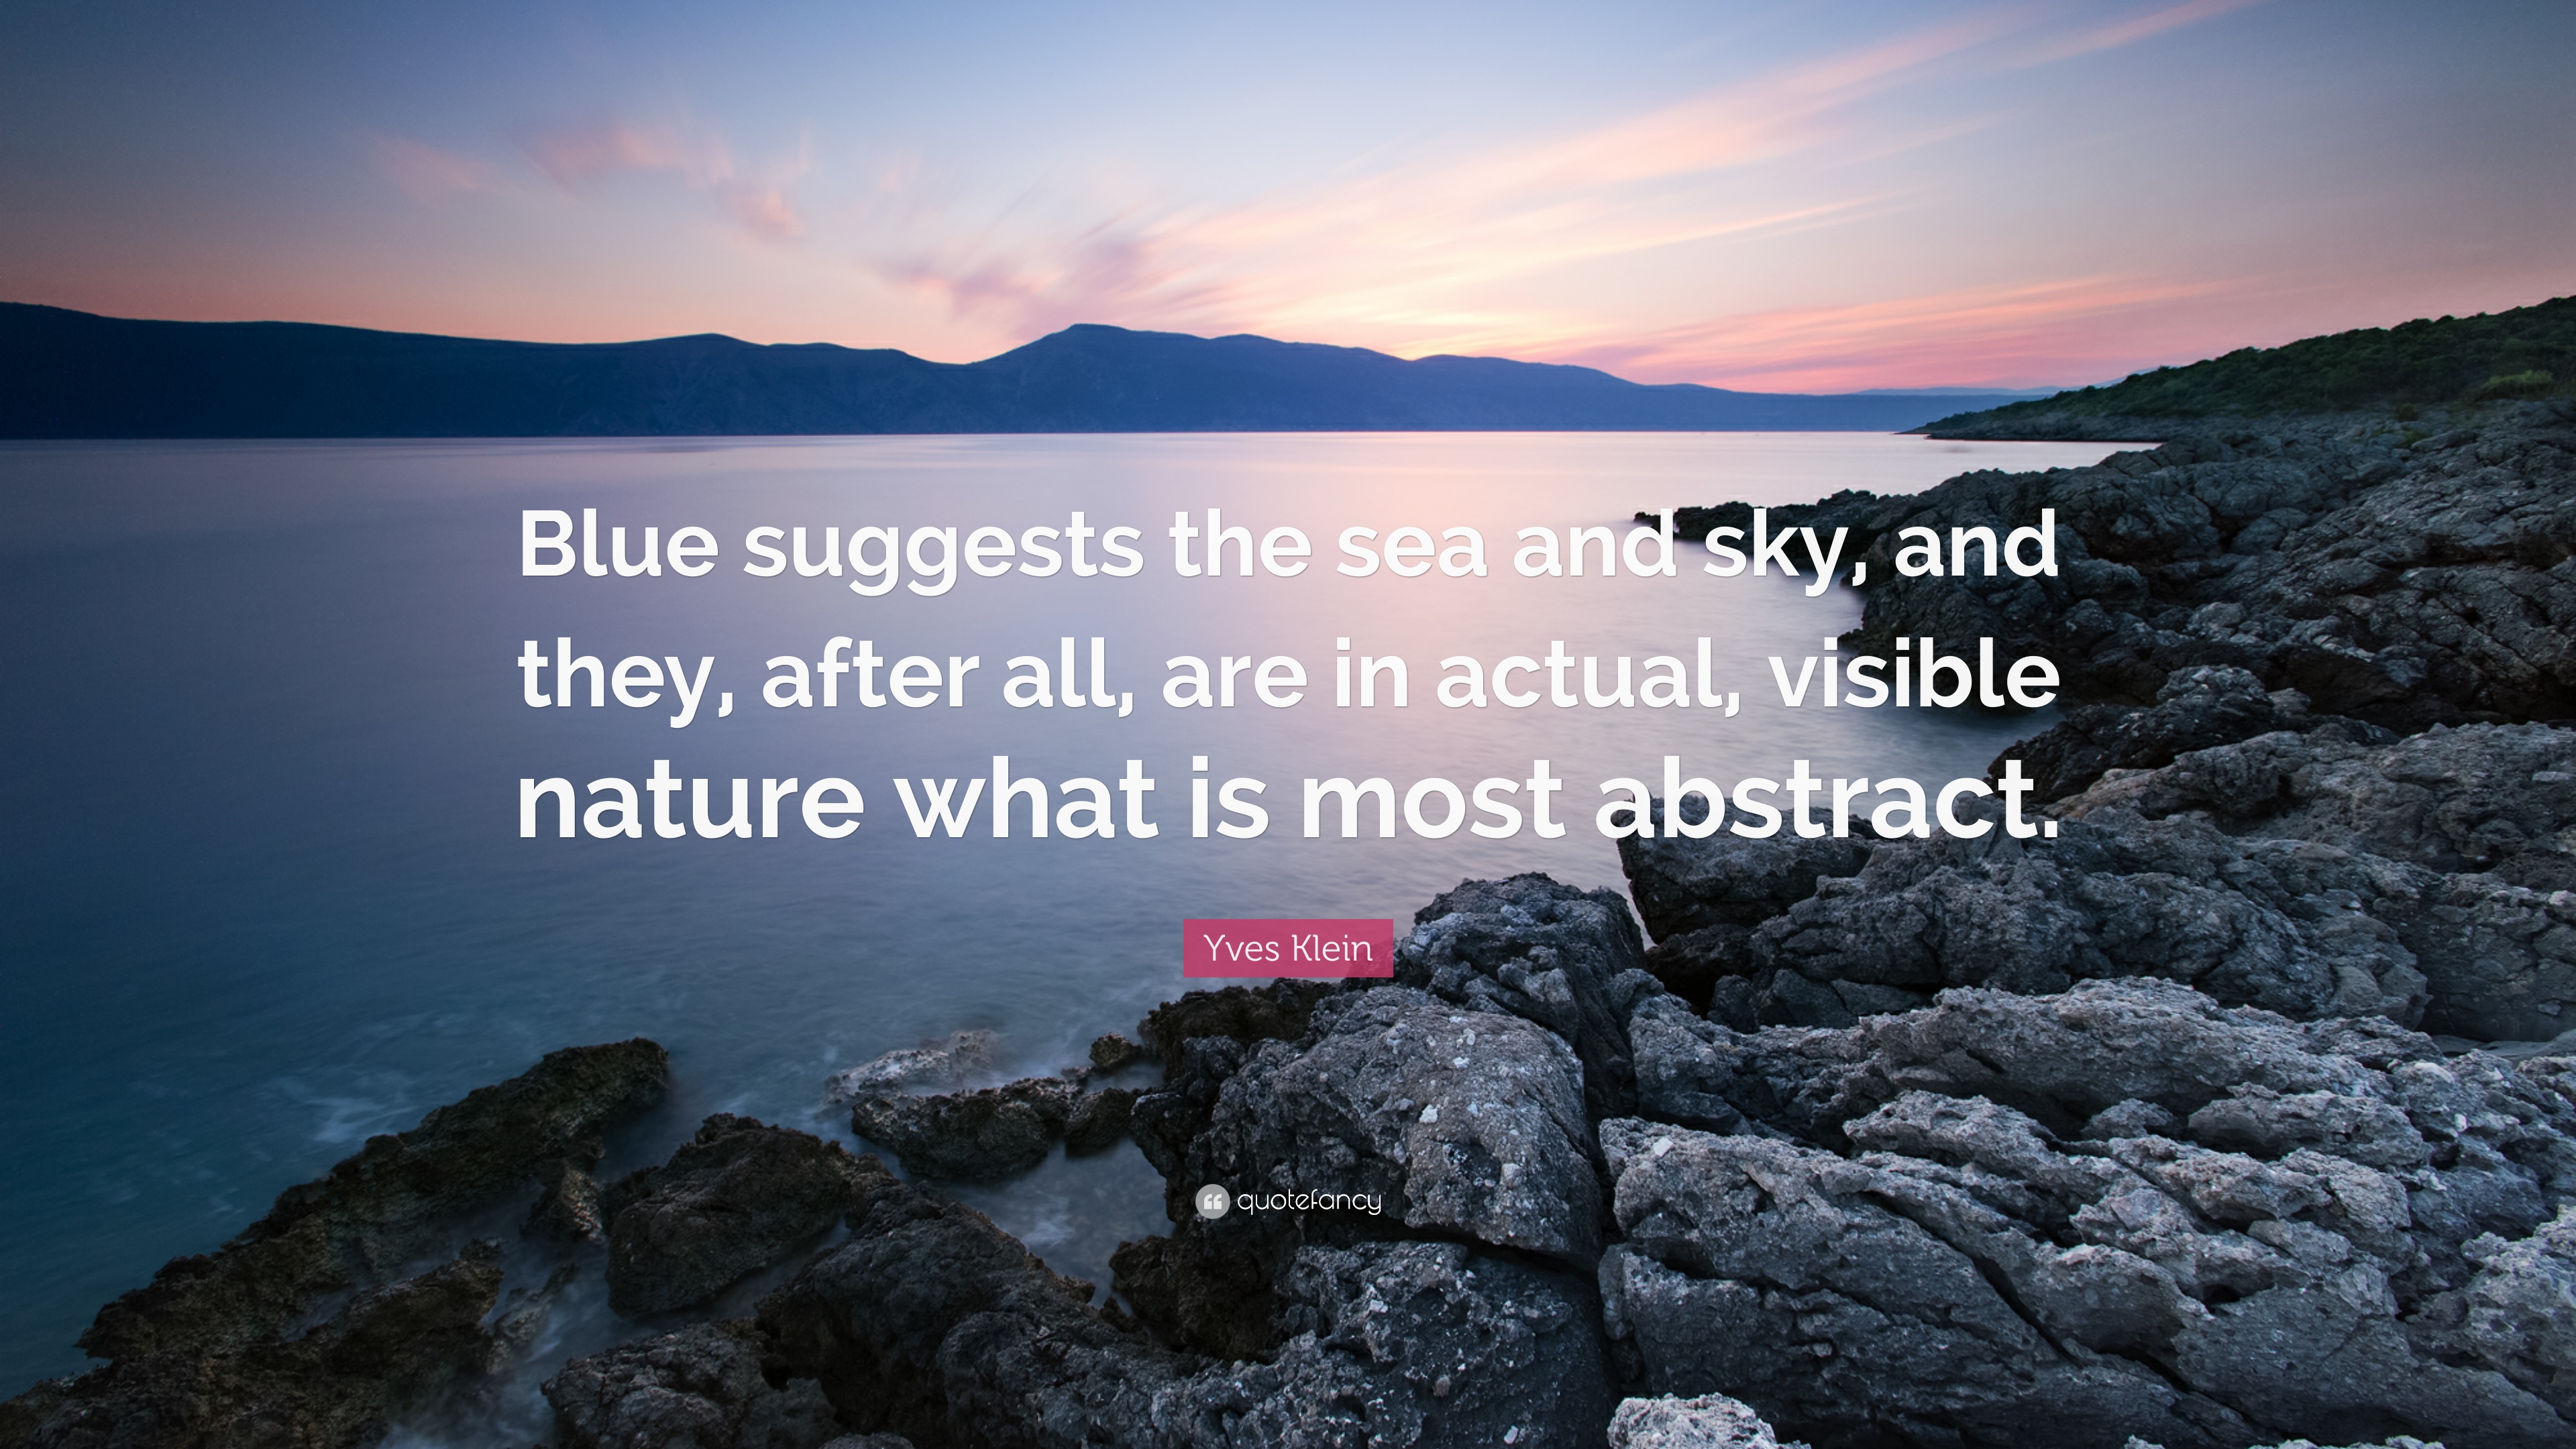 Yves Klein Quote: “Blue suggests the sea and sky, and they